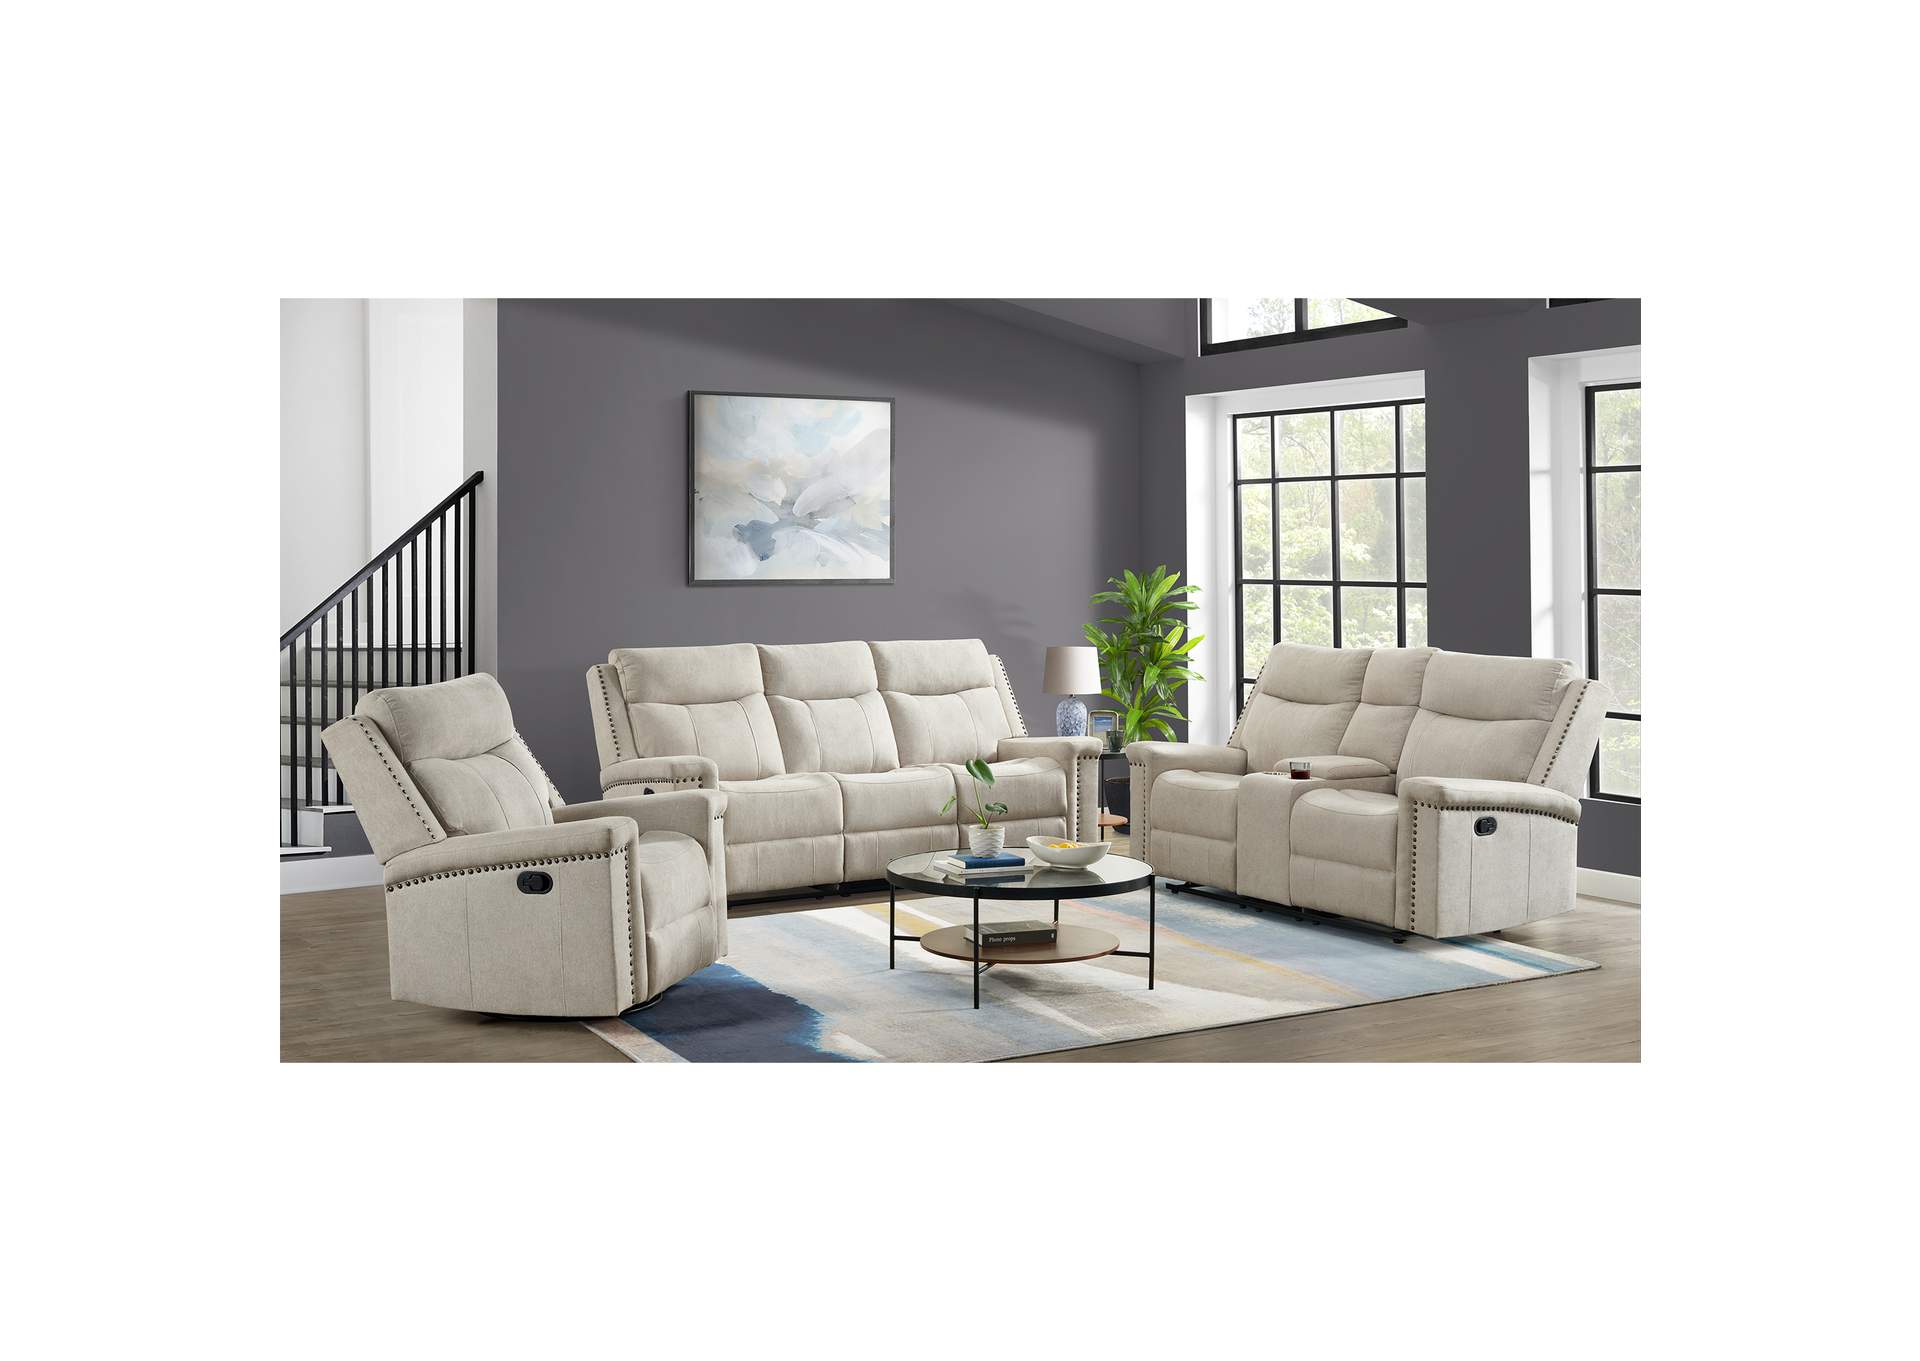 Ingram Motion Loveseat With Console In Hammertime 20 Cream,Elements